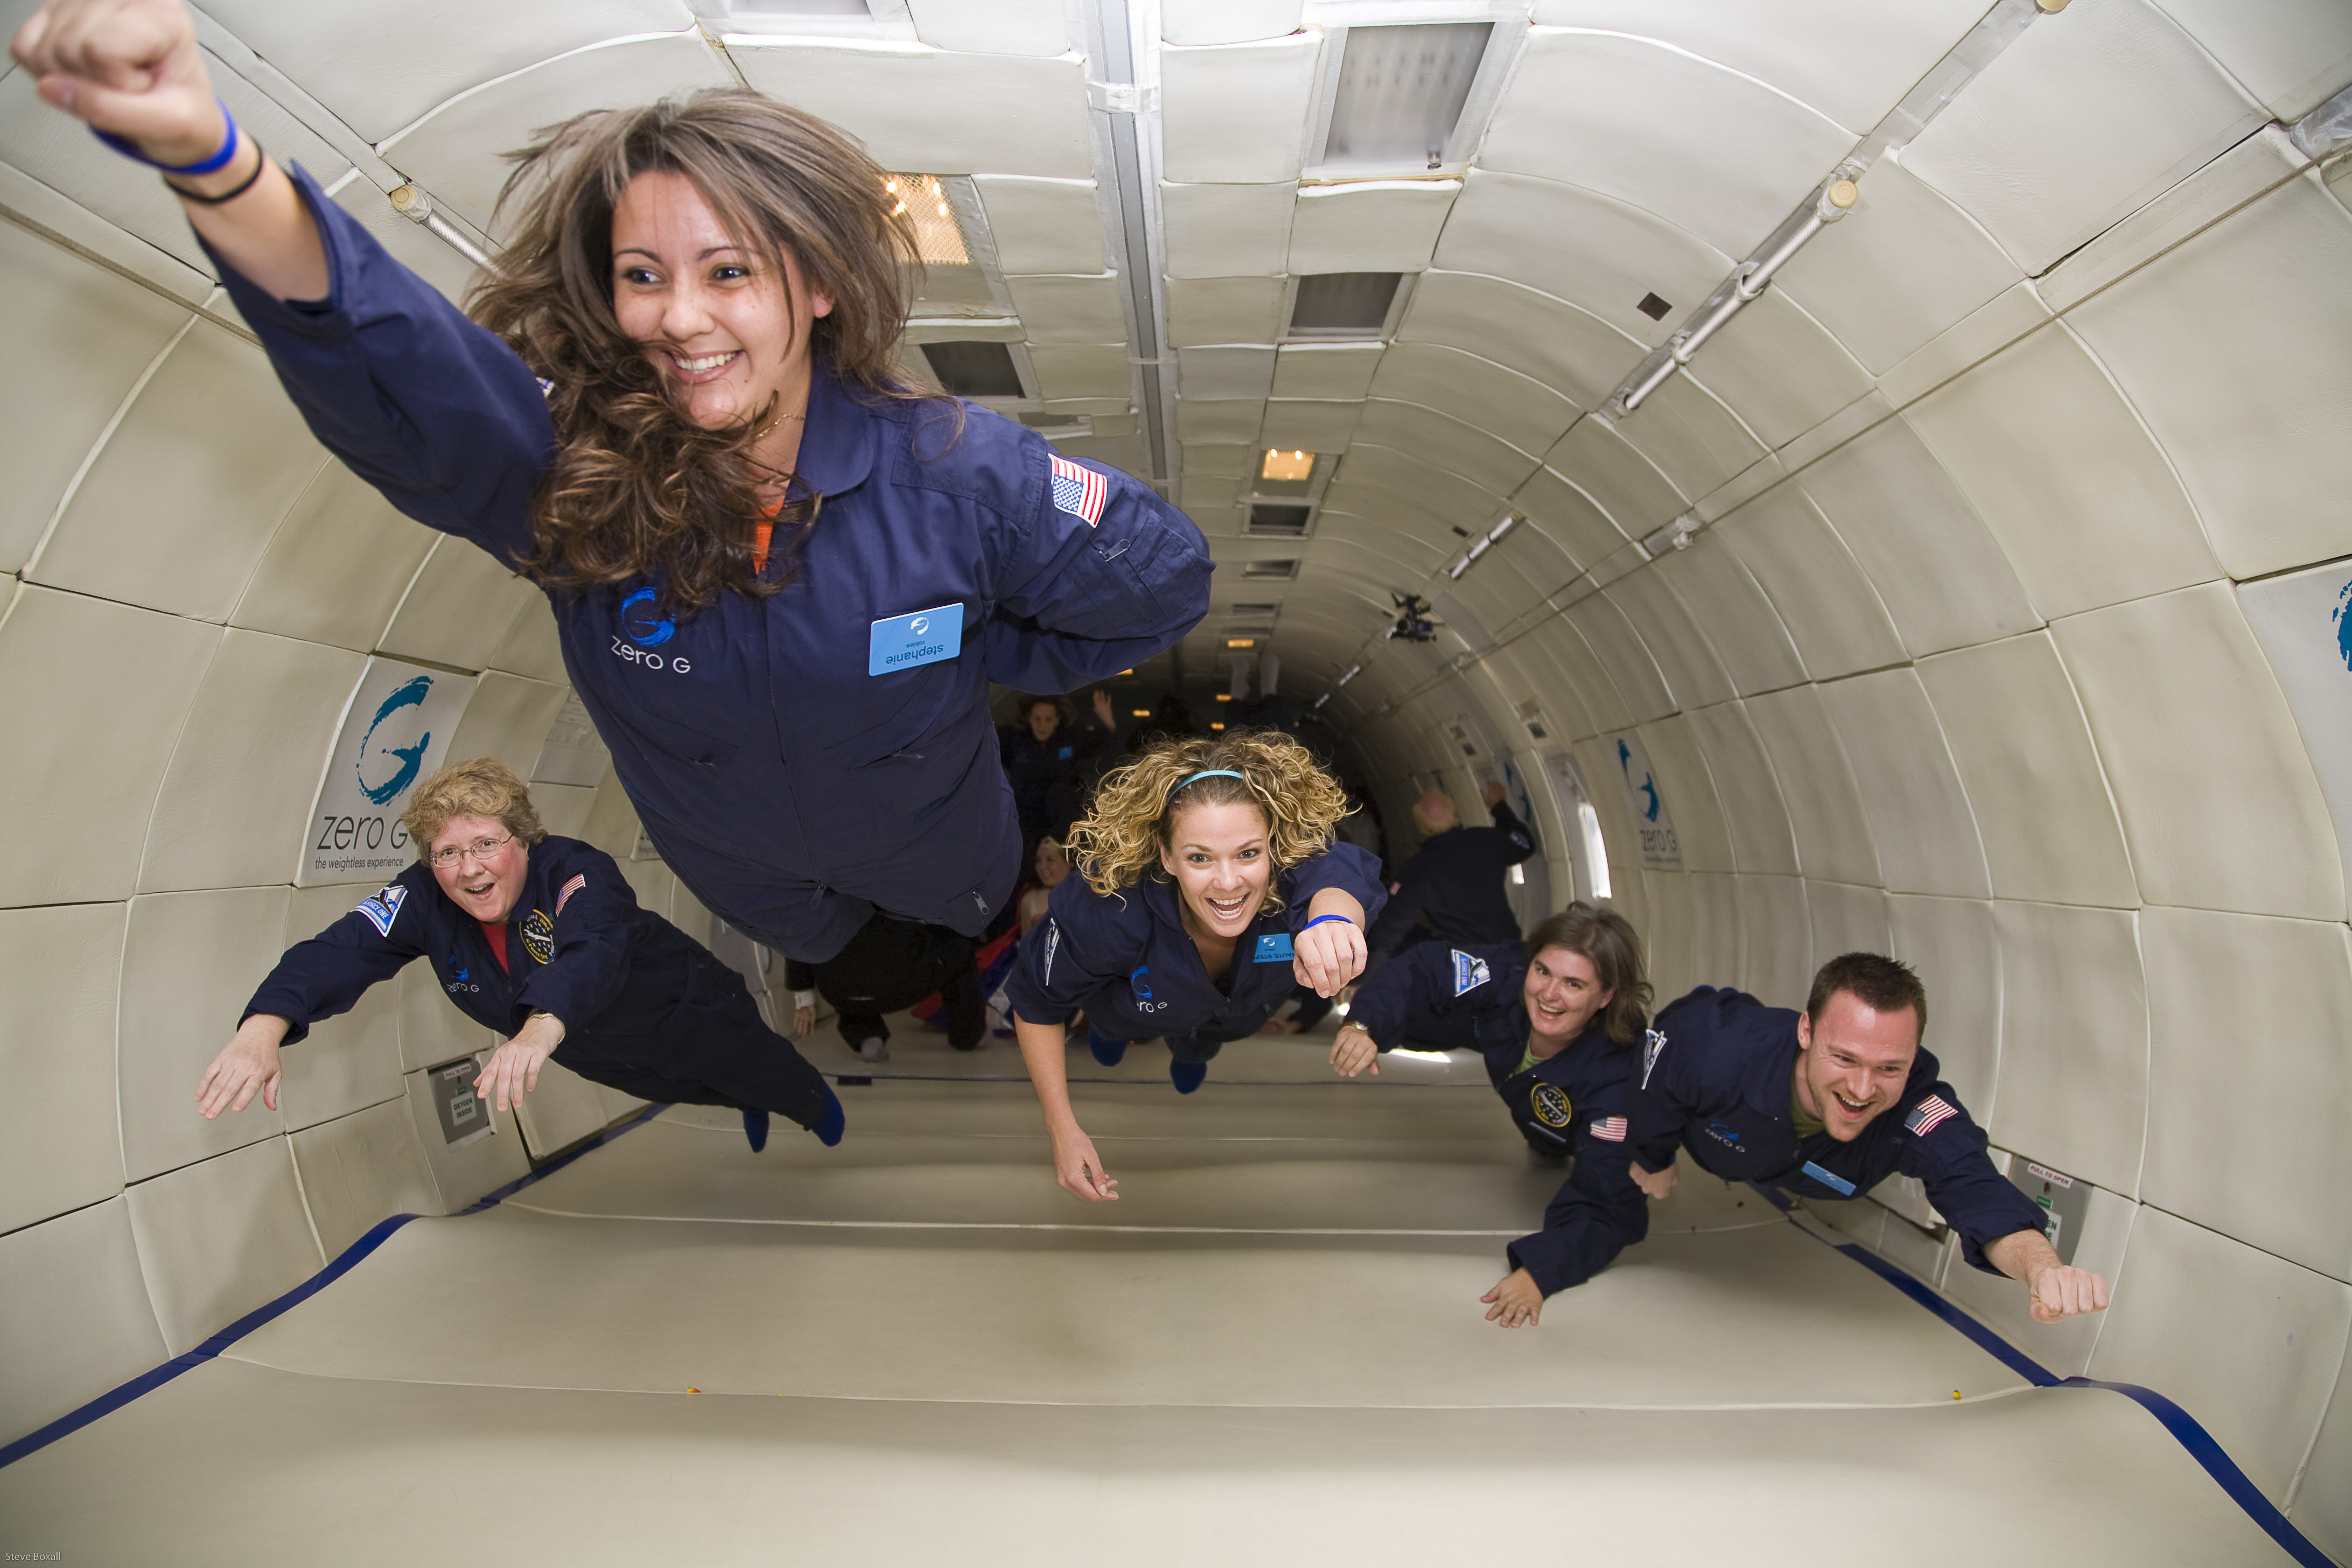 Zero-G announces plans for once-in-a-lifetime zero gravity musical concerts